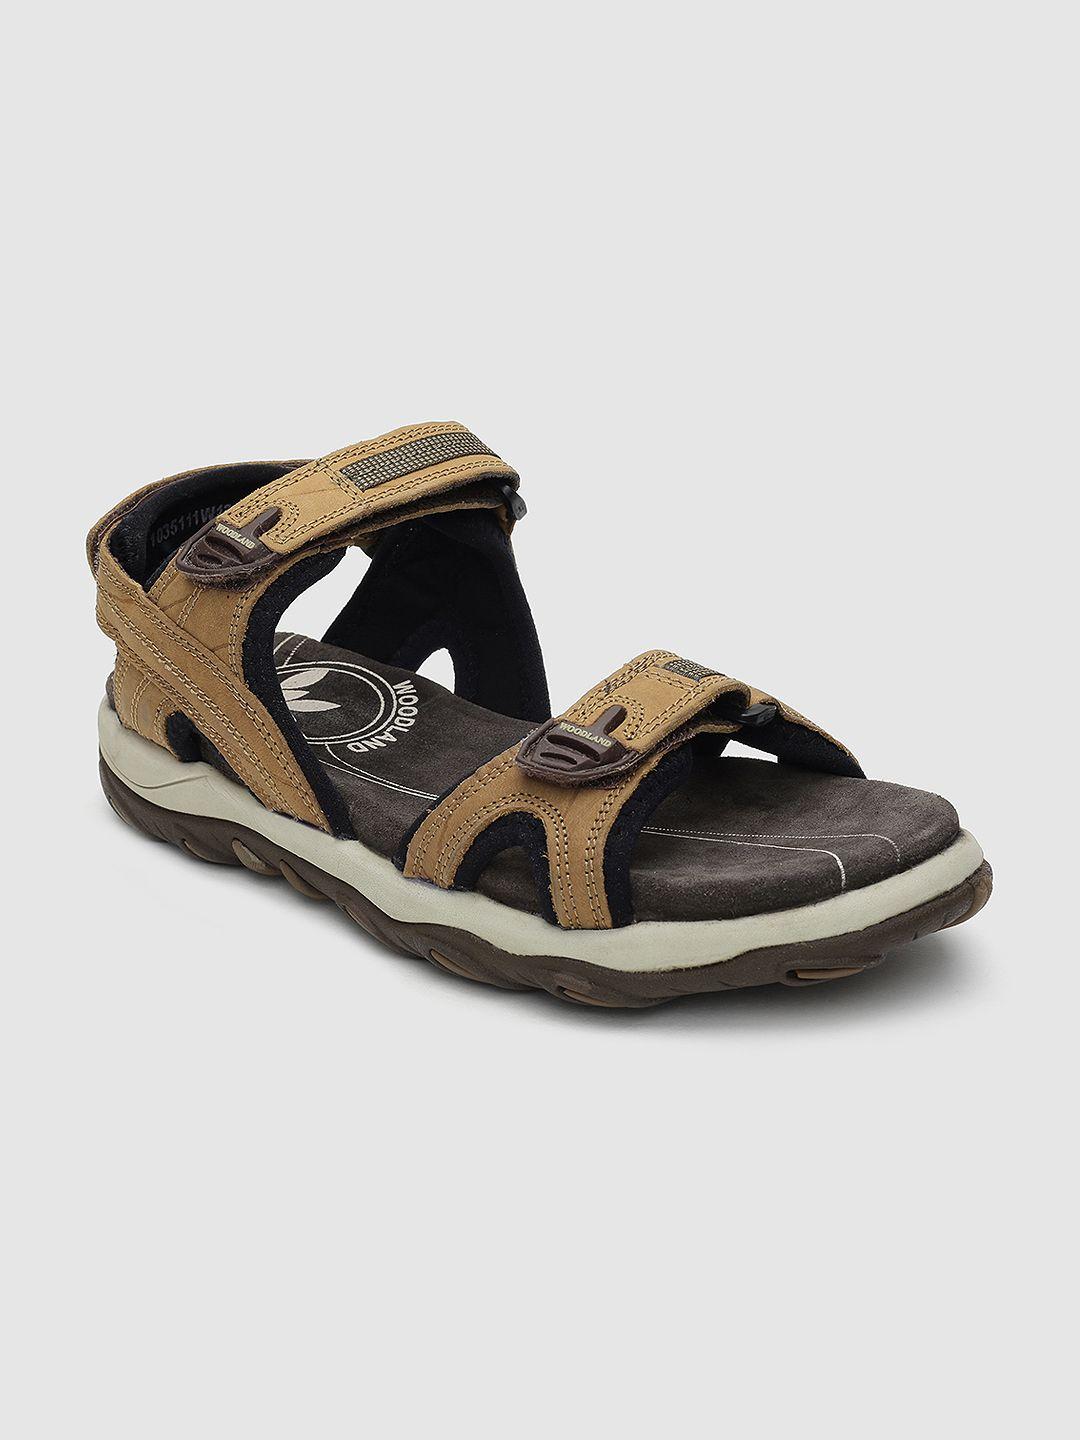 woodland-men-brown-solid-leather-sports-sandals